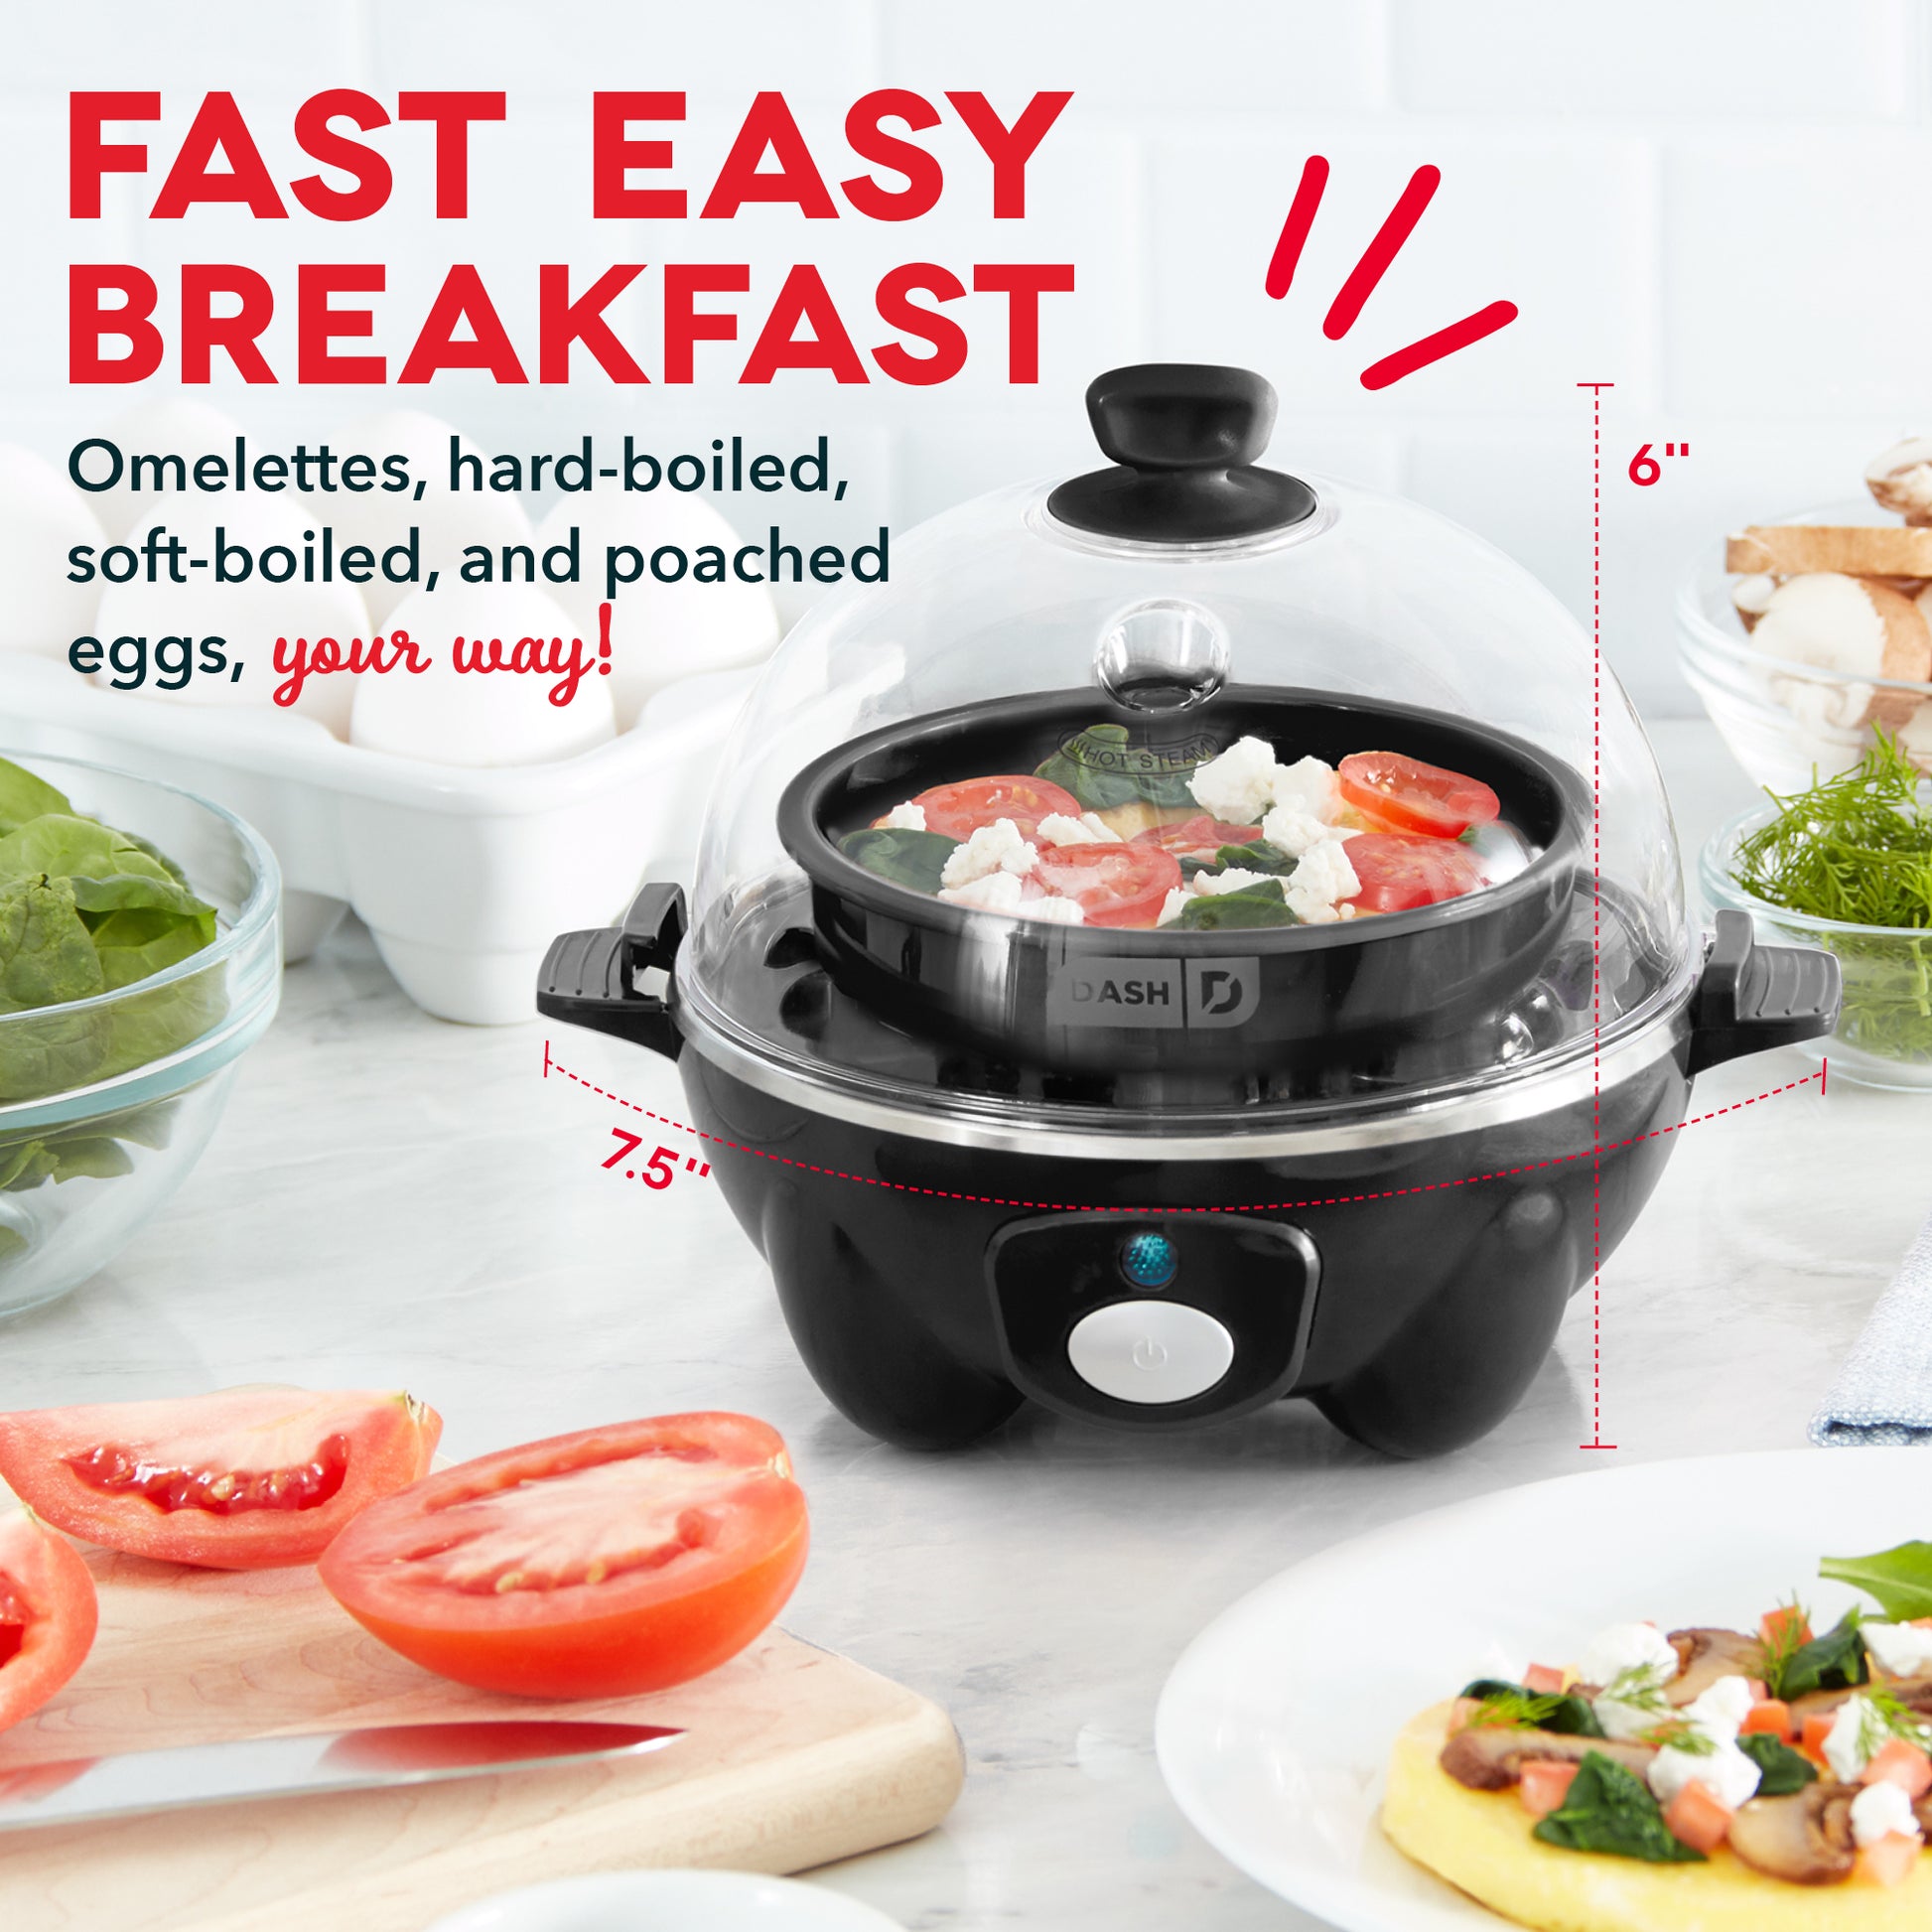 I Try 's Top-Rated Egg Cooker, Dash Rapid Egg Cooker:   By Tasty